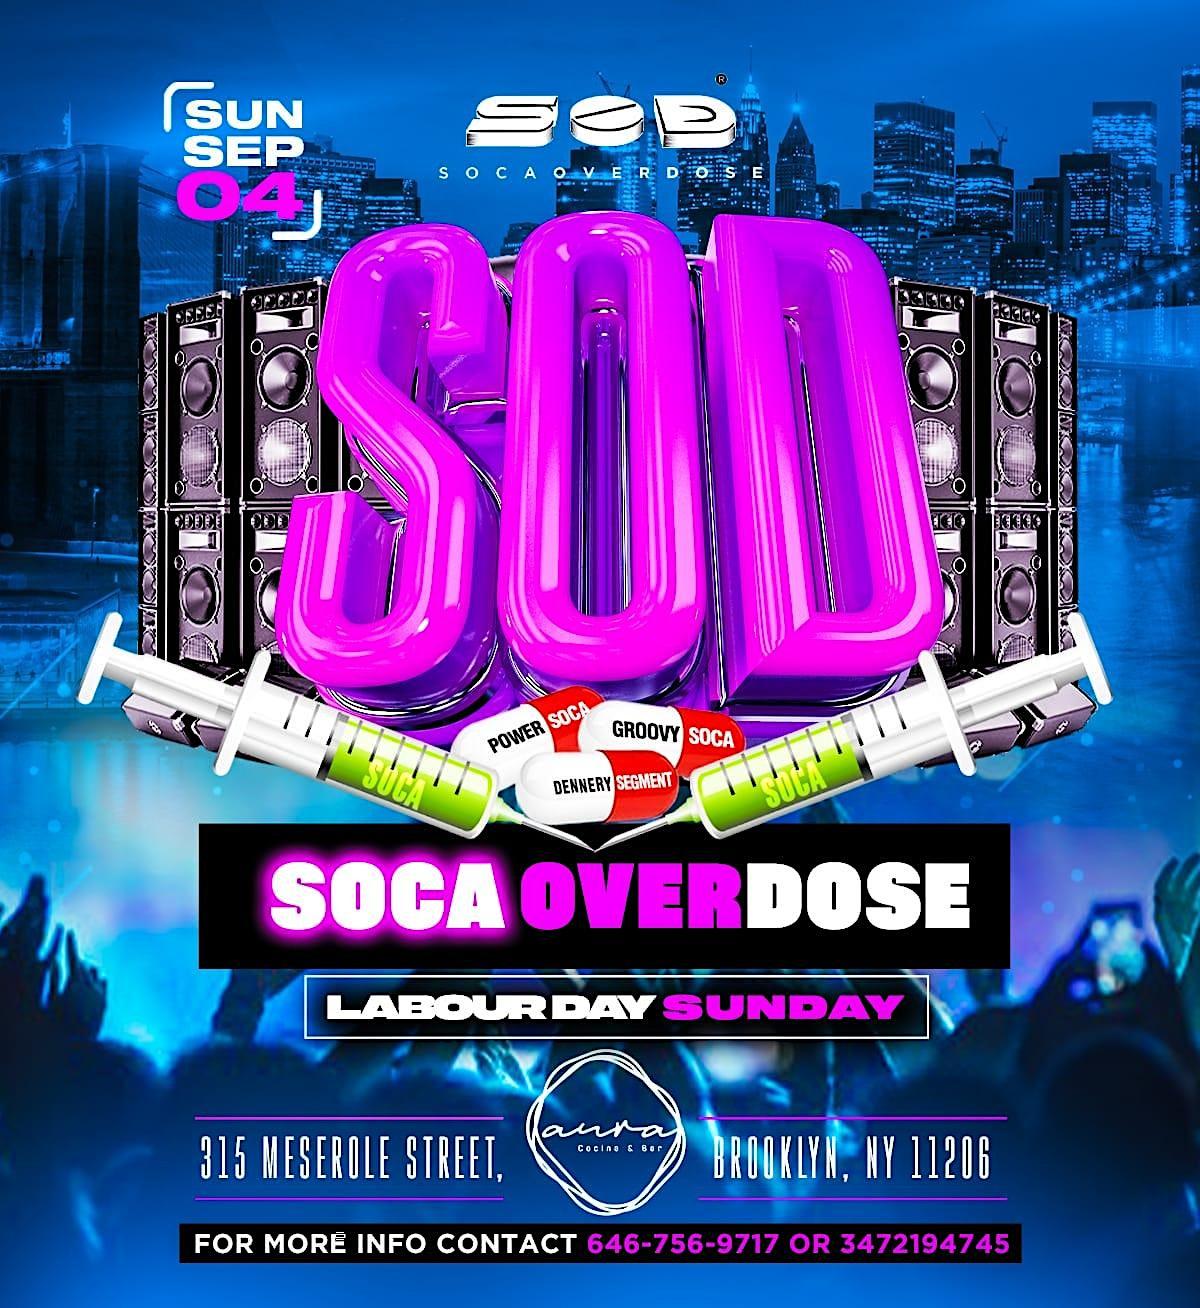 Soca Over Dose flyer or graphic.